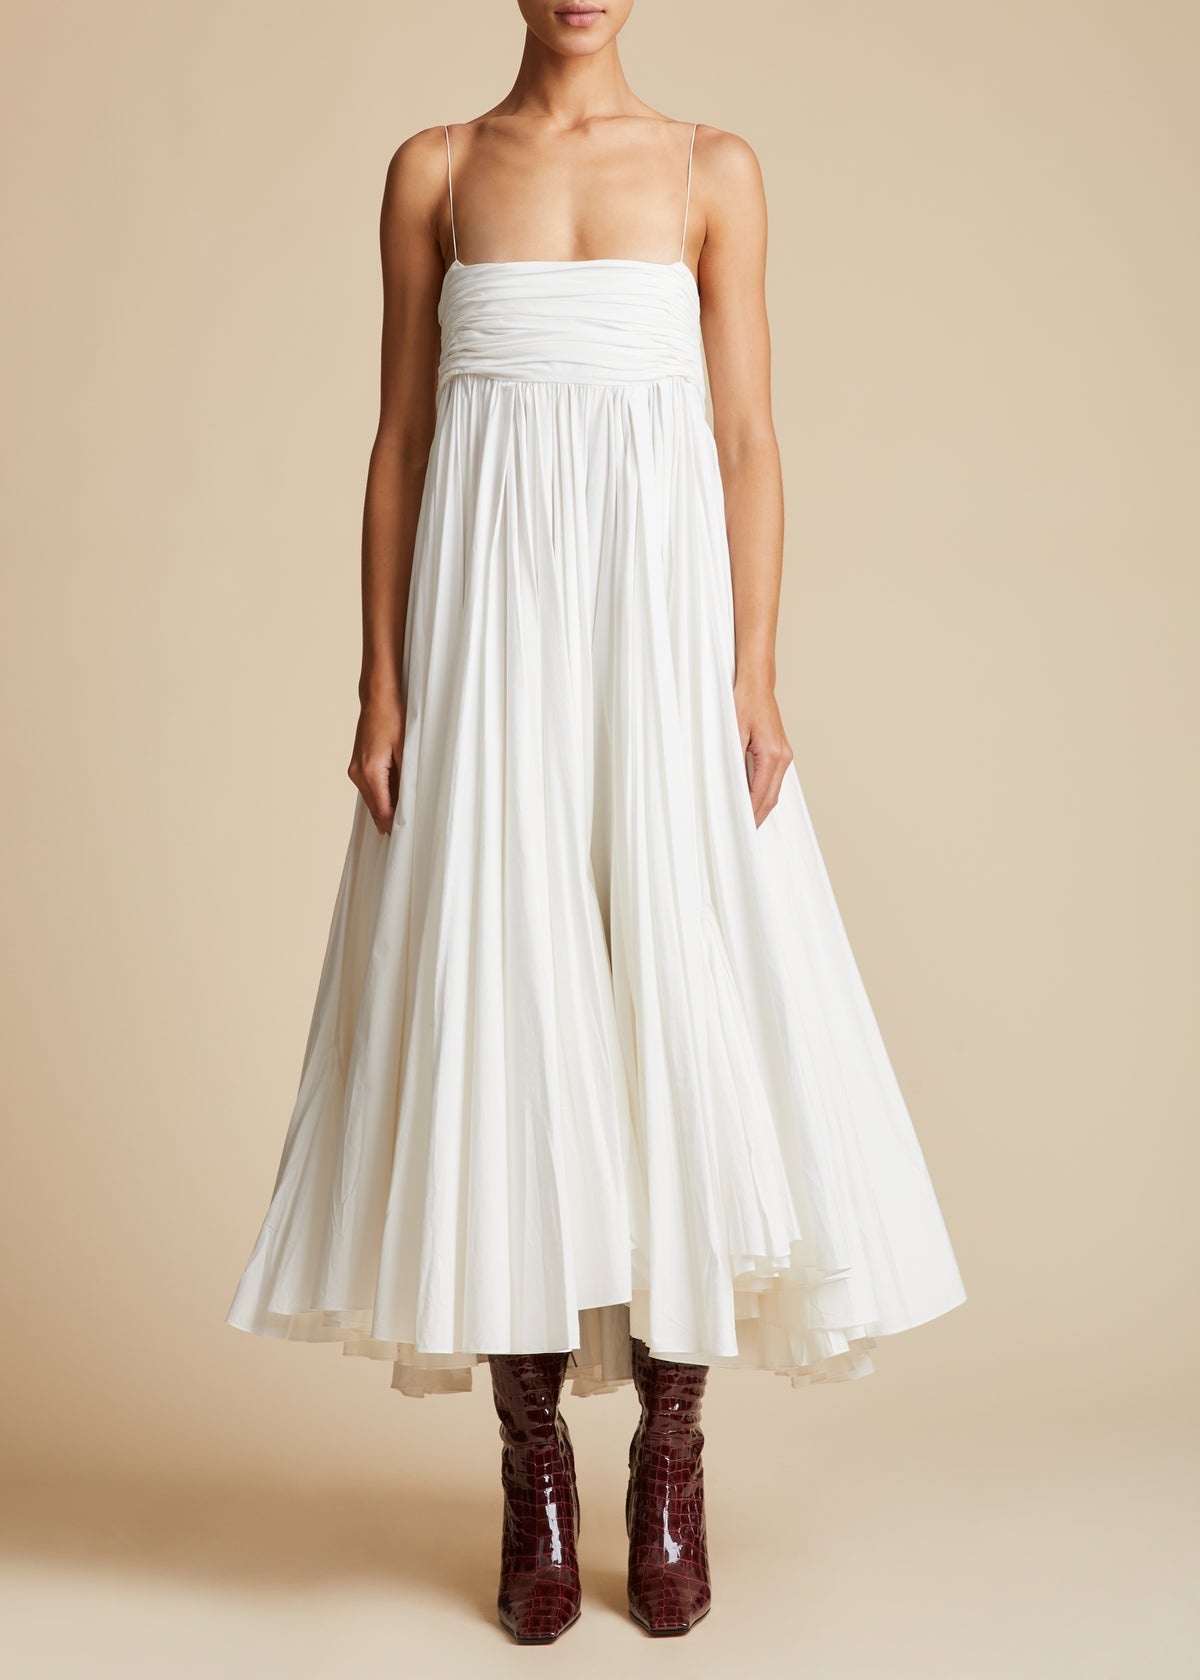 The Lally Dress in White - 2